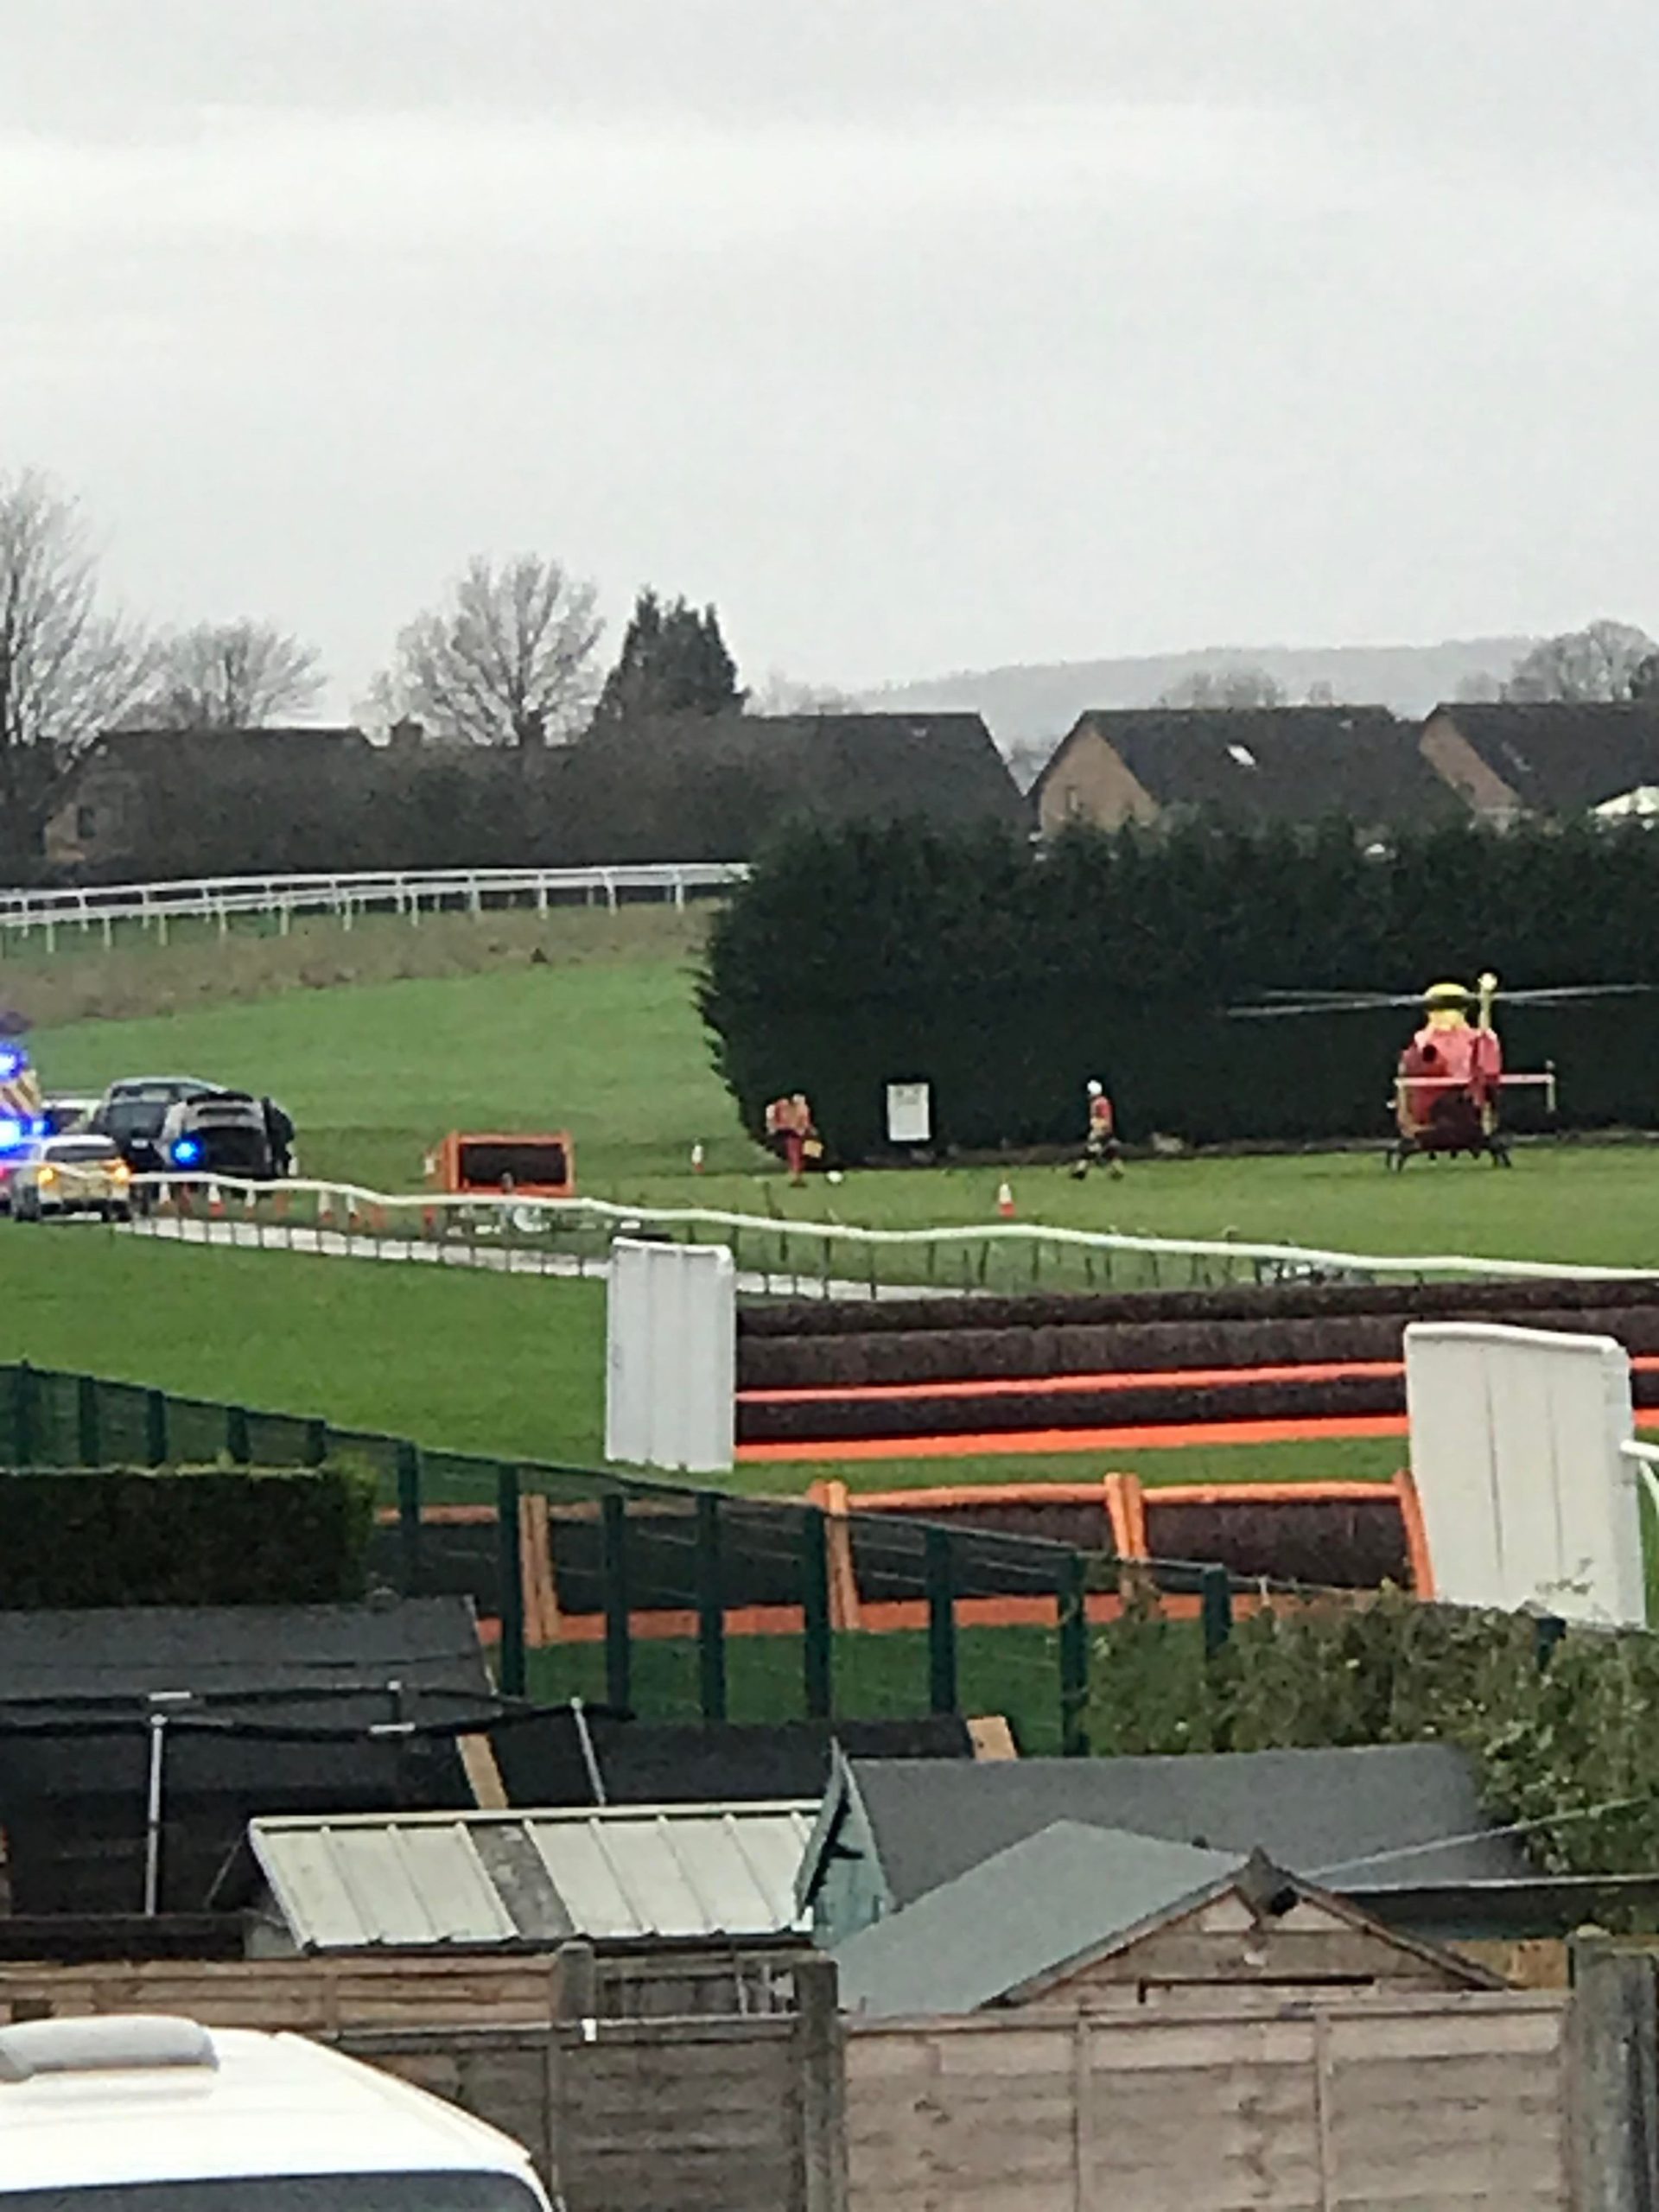 NEWS | Air ambulance and West Mercia Police in attendance at incident on Hereford Racecourse